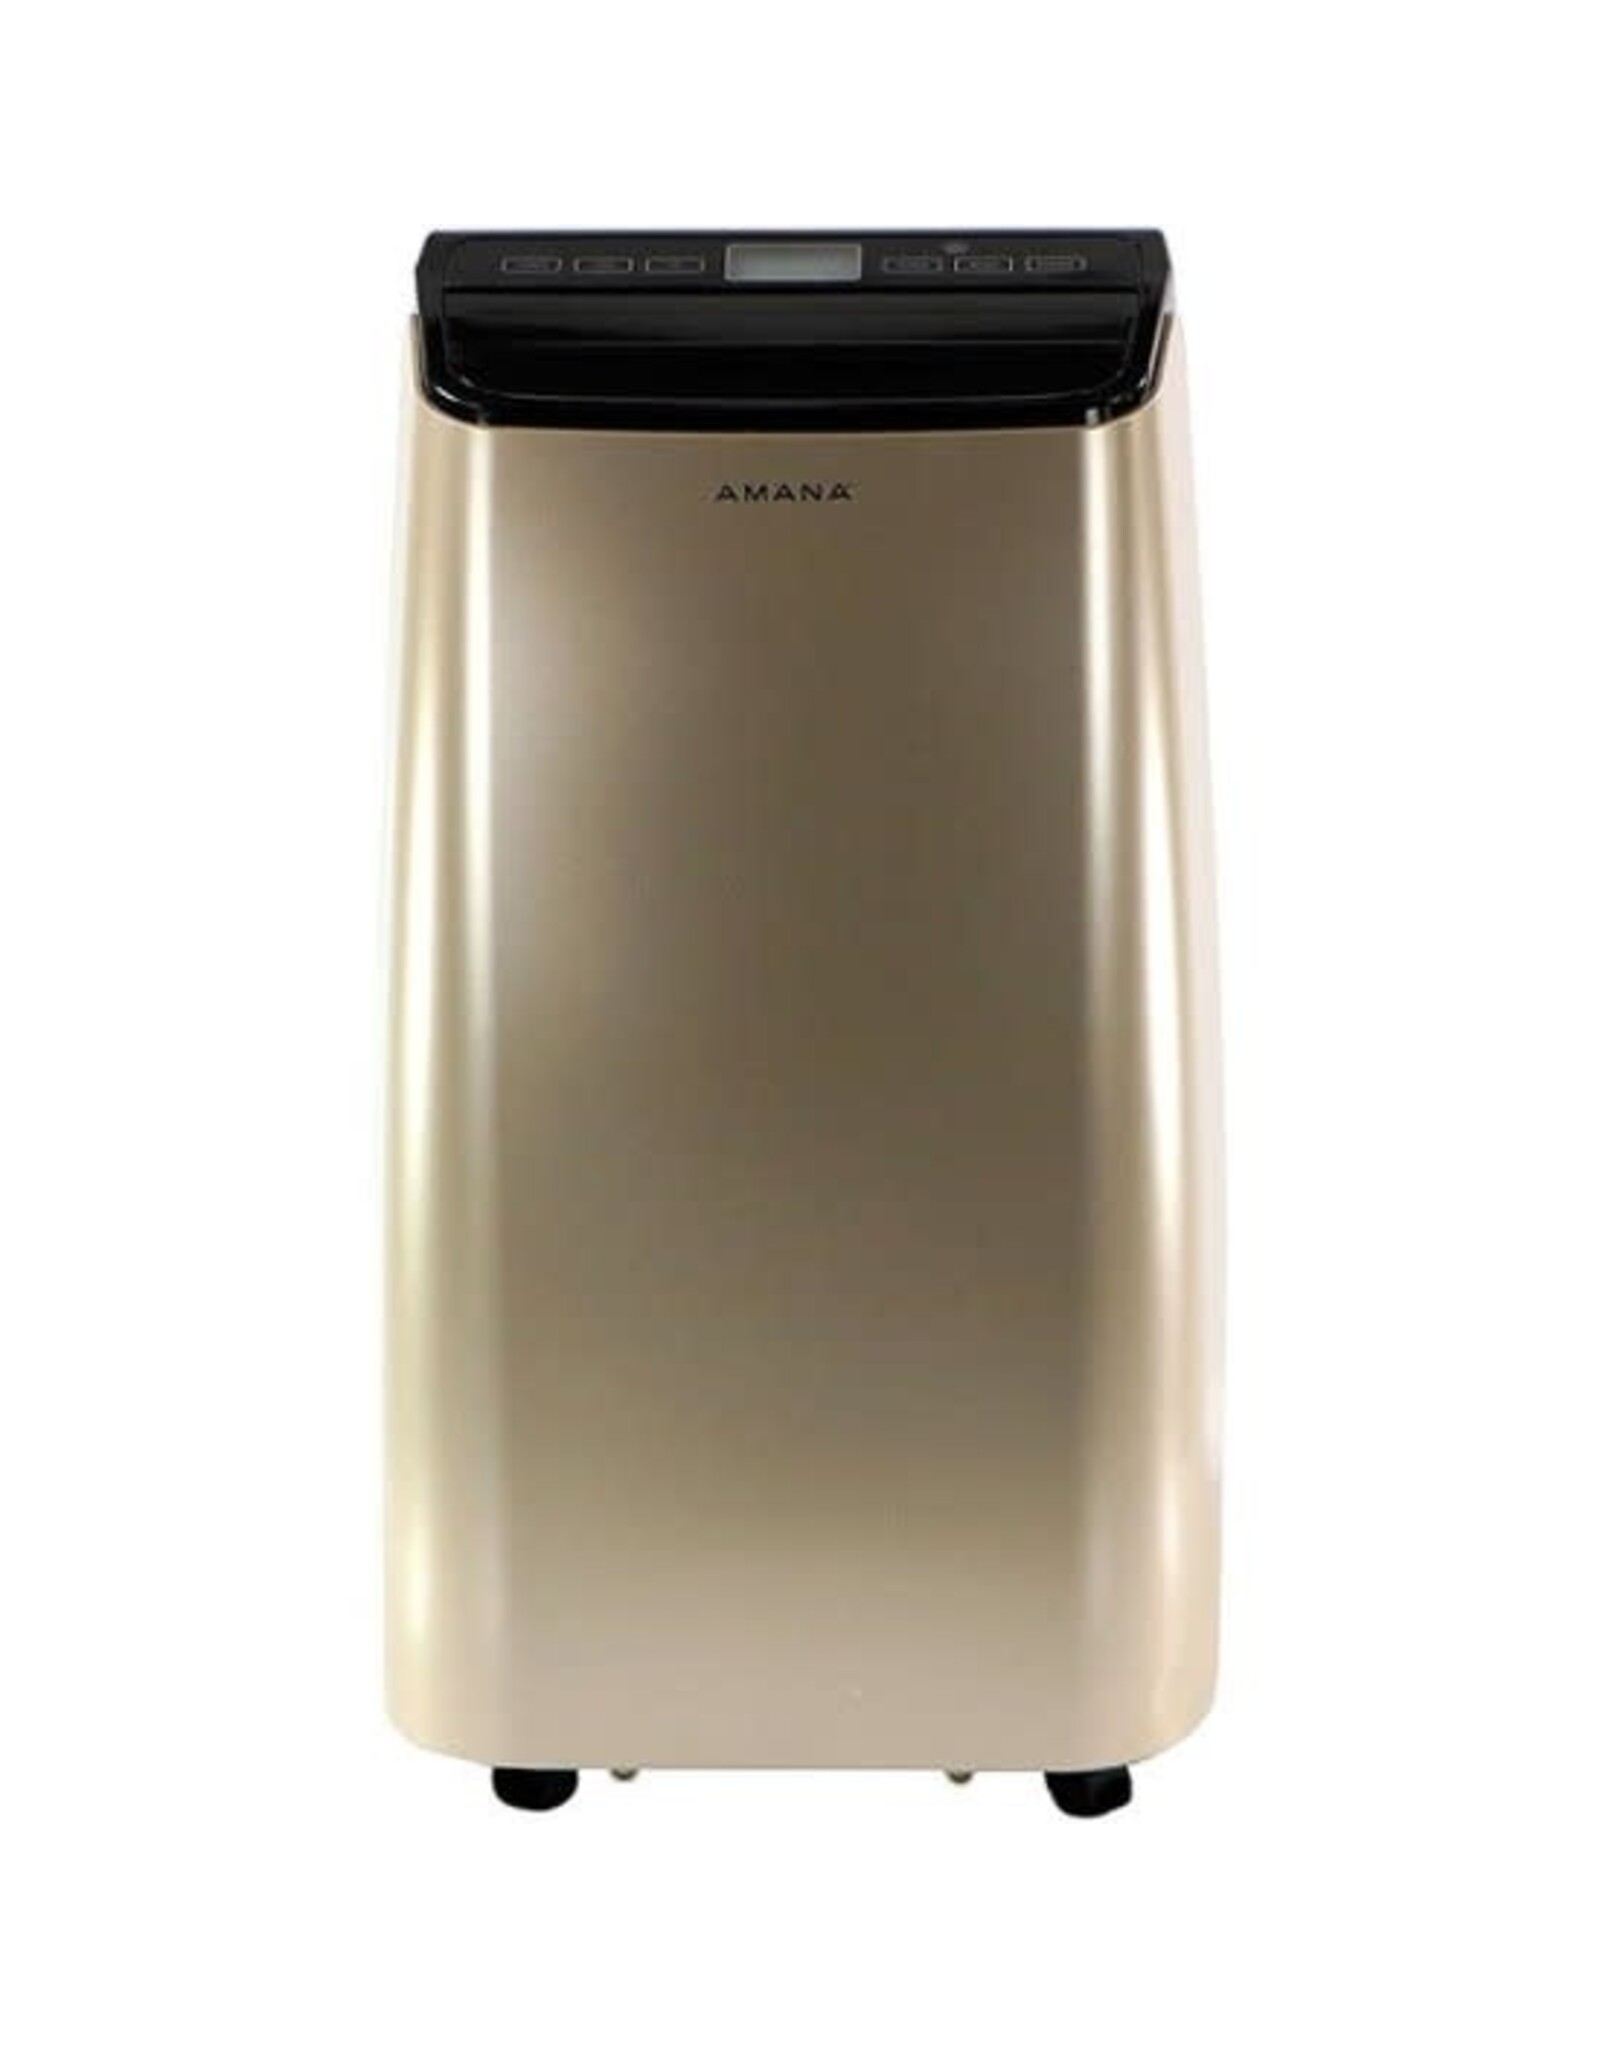 AMANA AMAP121AD-2 Amana 7,500 BTU Portable Air Conditioner Cools 500 Sq. Ft. with LCD Display, Auto-Restart and Wheels in Gold